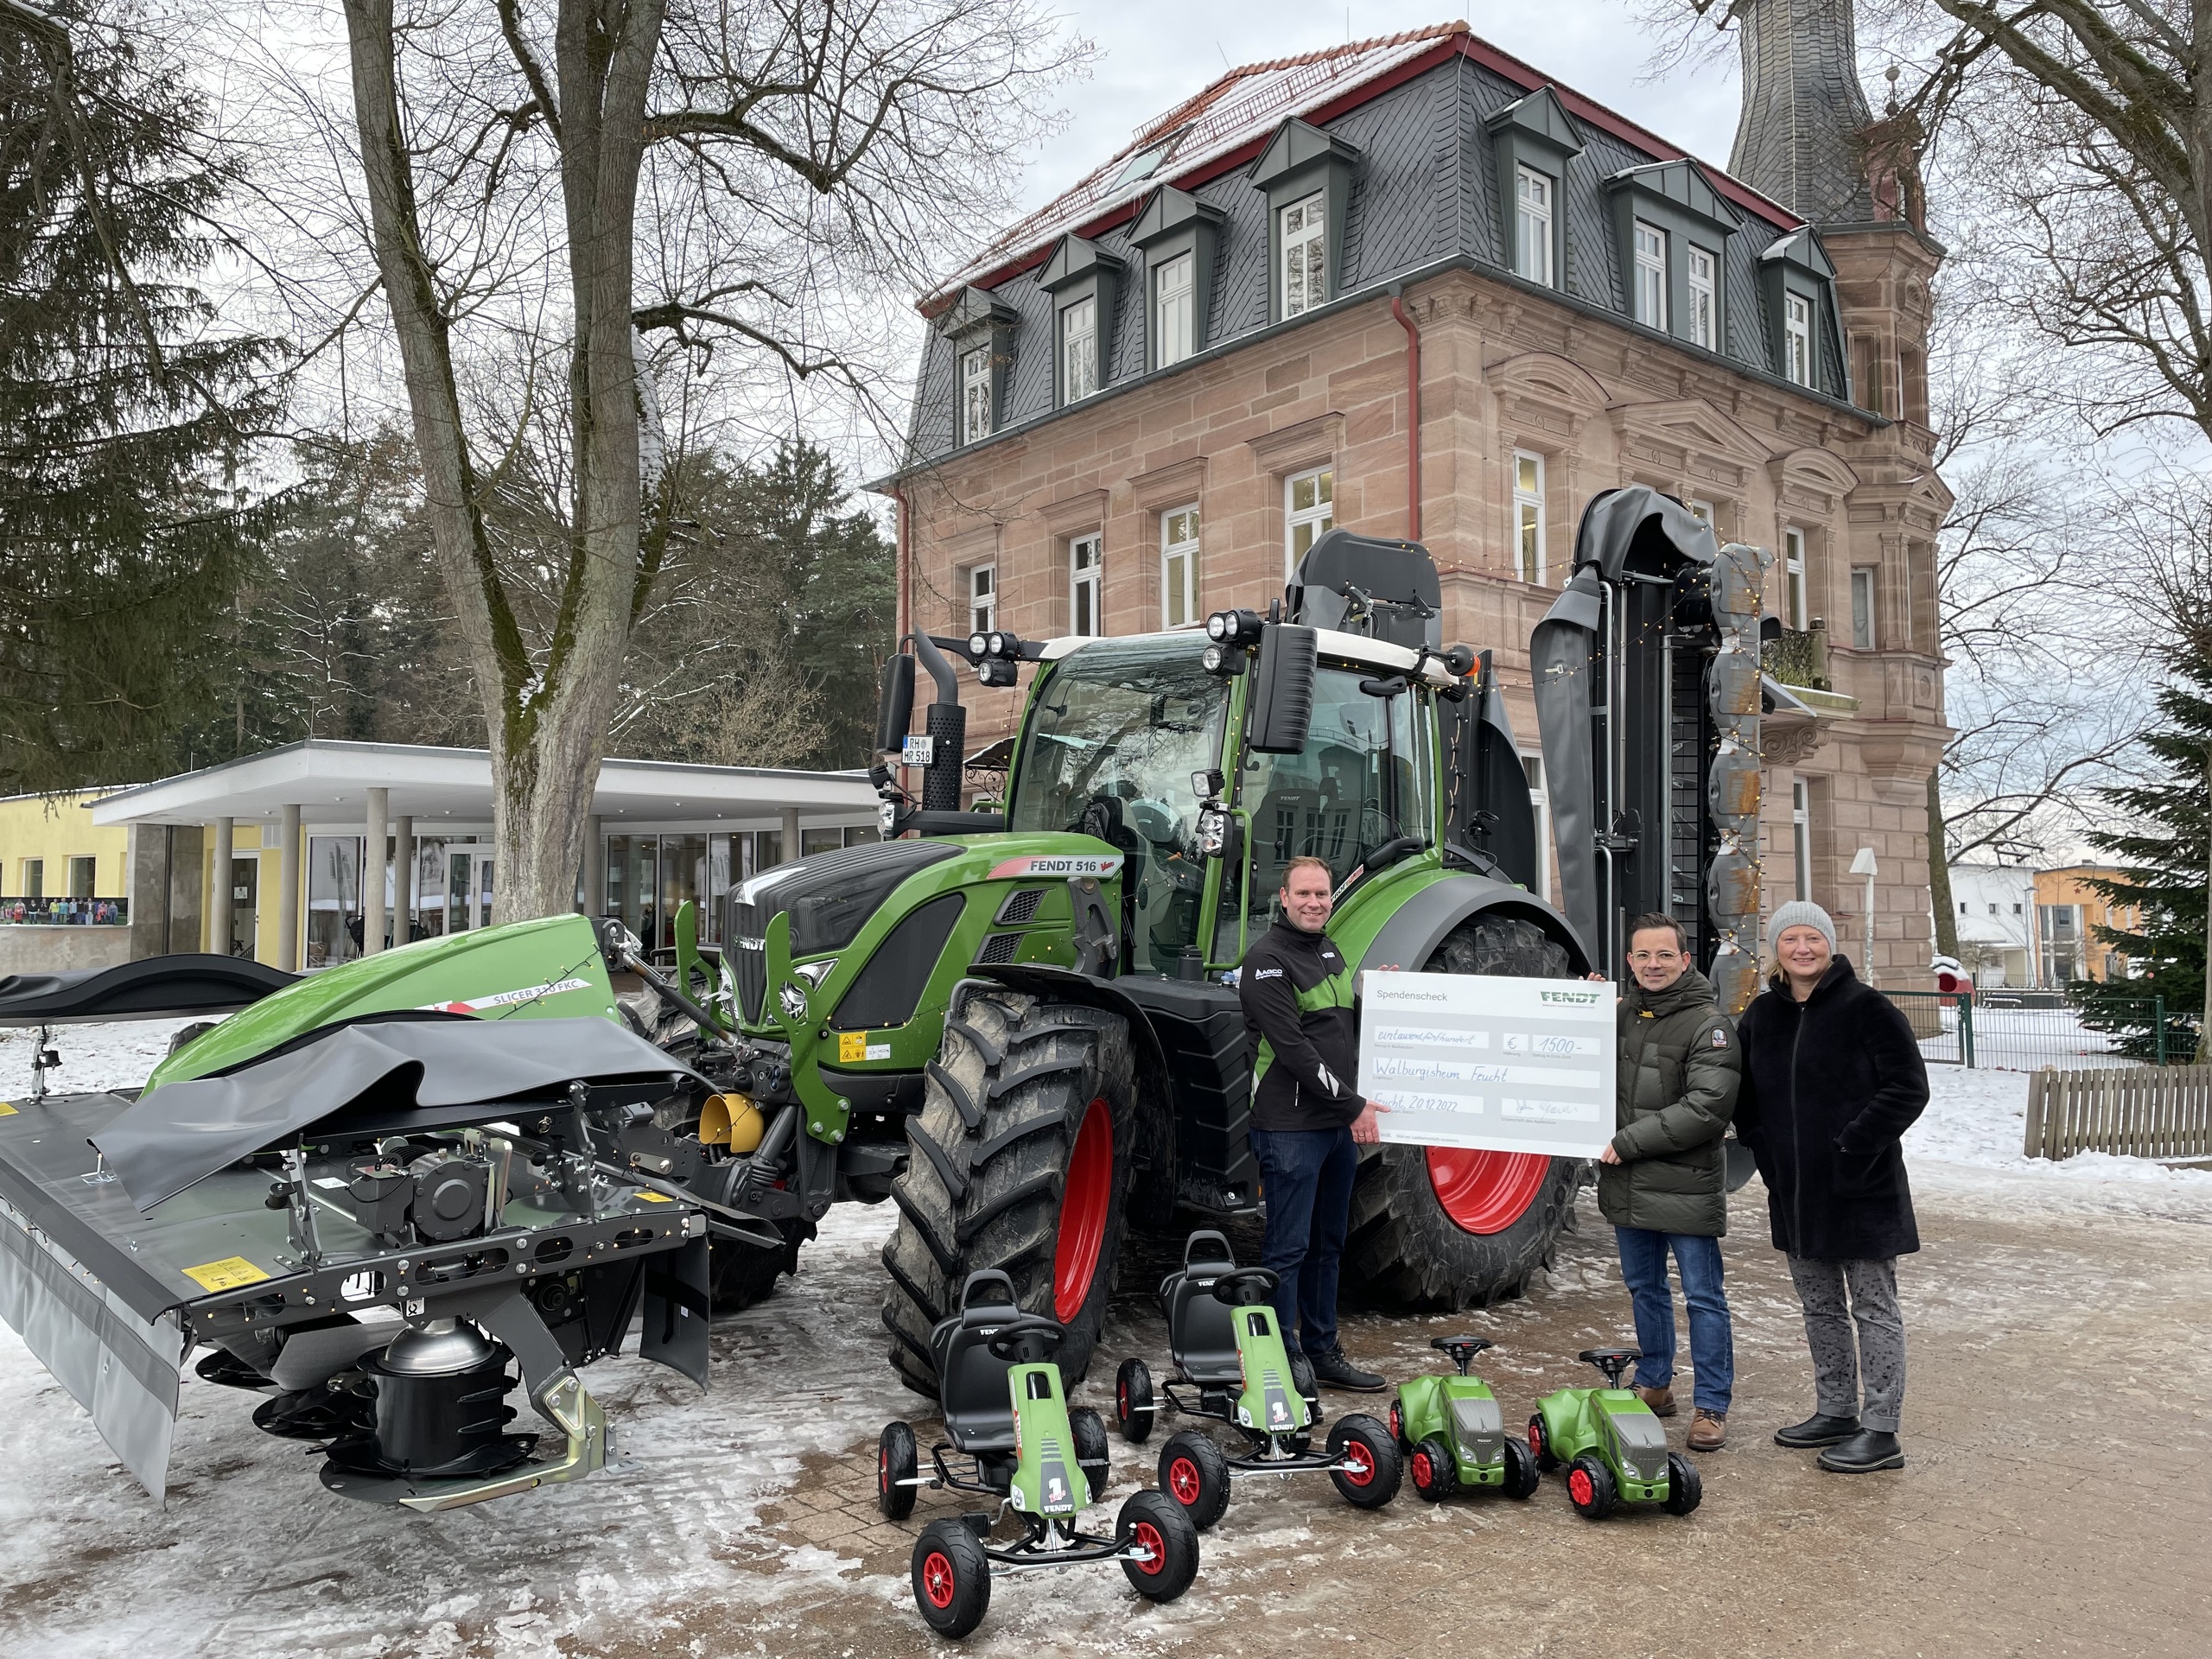 Fendt donates to the Walburgisheim Feucht - a facility for children and youths